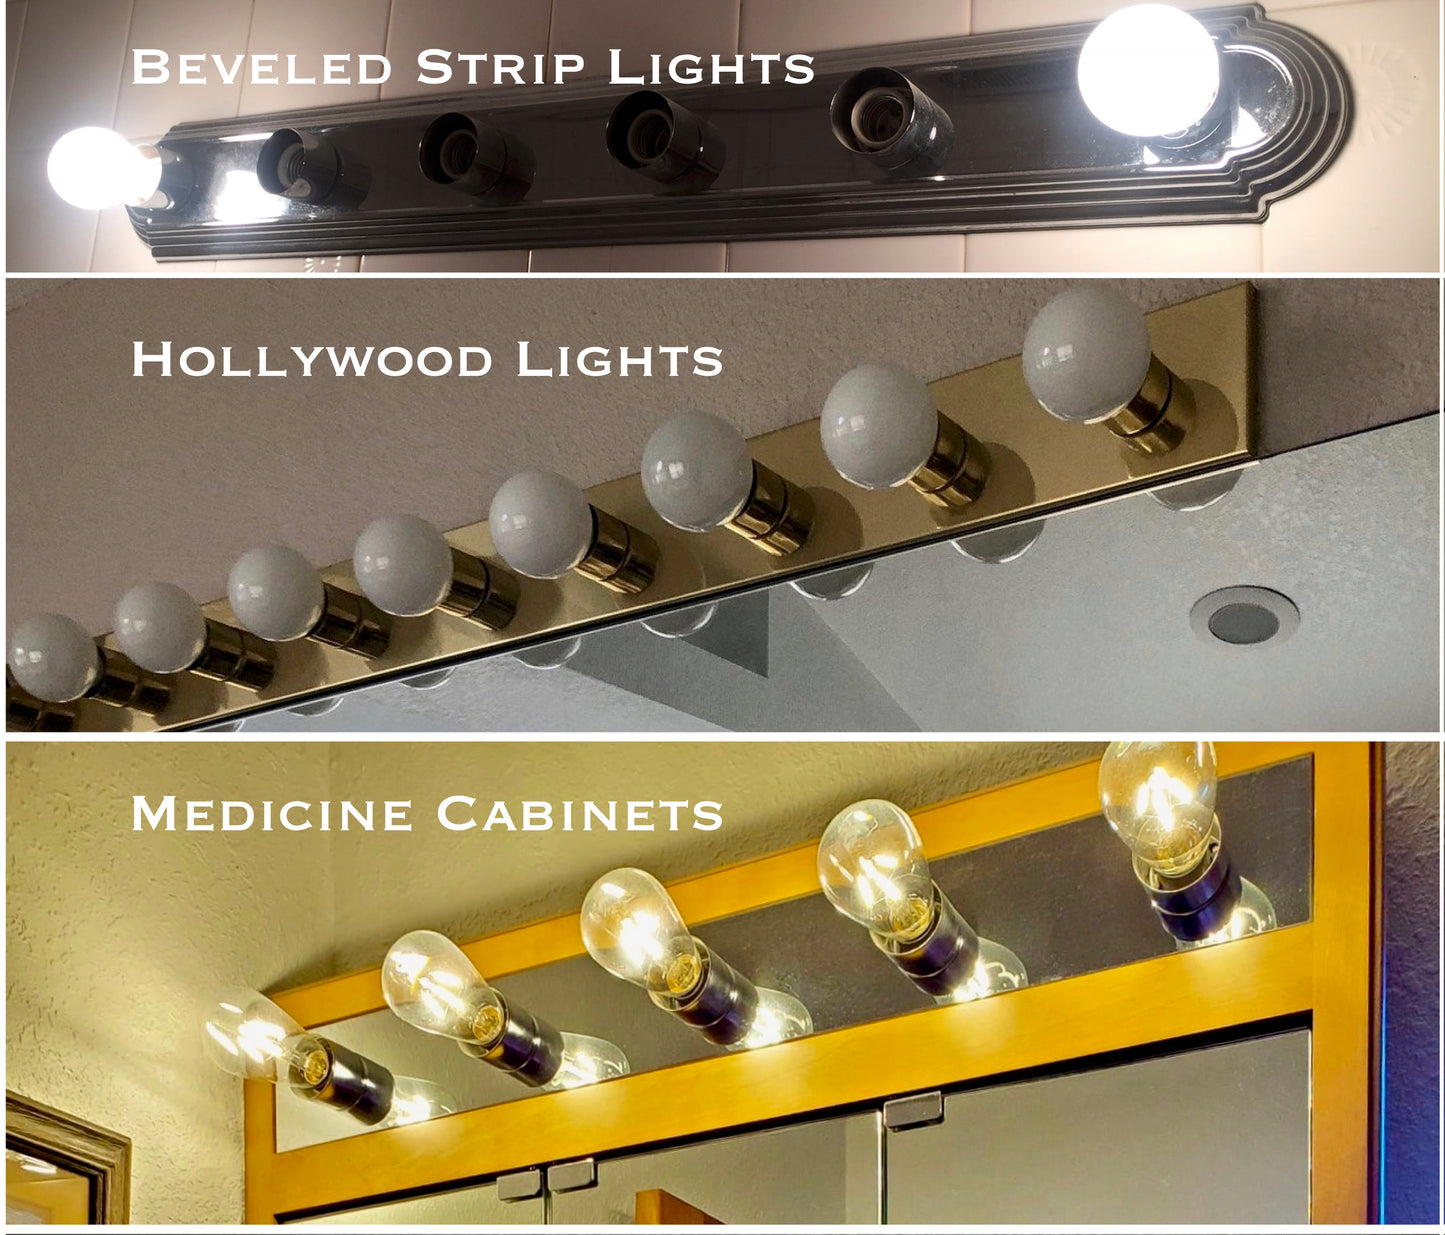 This pic shows 3 types of strip lights that our EzLightWraps cover - a beveled edge fixture with a few bulbs missing, a standard 8 bulb Hollywood Light in gold, and a medicine cabinet with built in lights. This one has Edison bulbs but we can hide those too. Usually you want smaller light bulbs in medicine cabinets